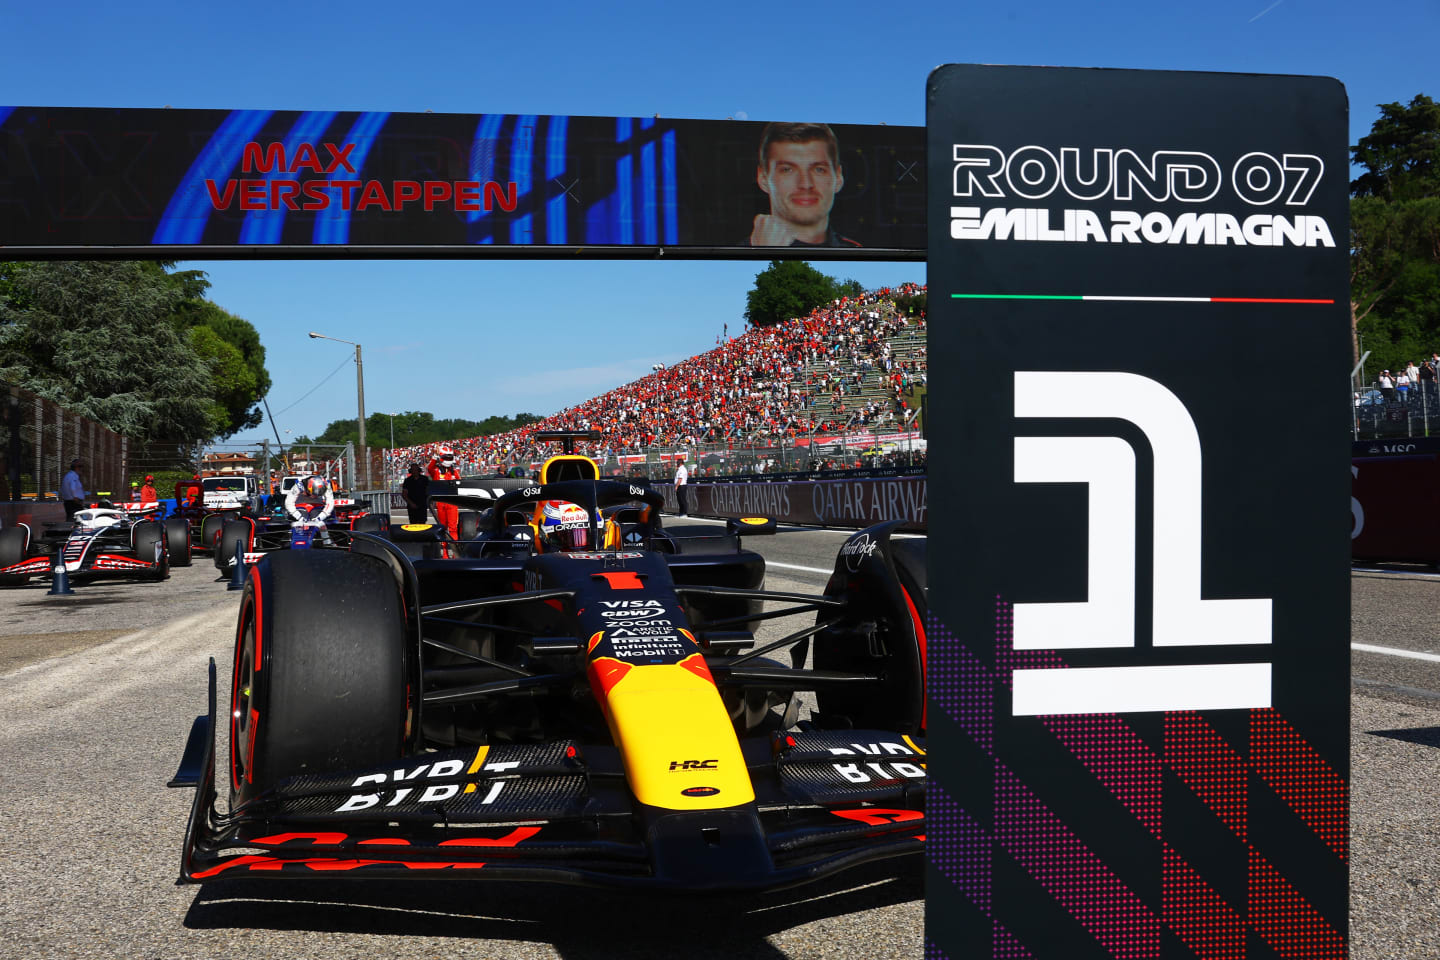 IMOLA, ITALY - MAY 18: Pole position qualifier Max Verstappen of the Netherlands driving the (1)